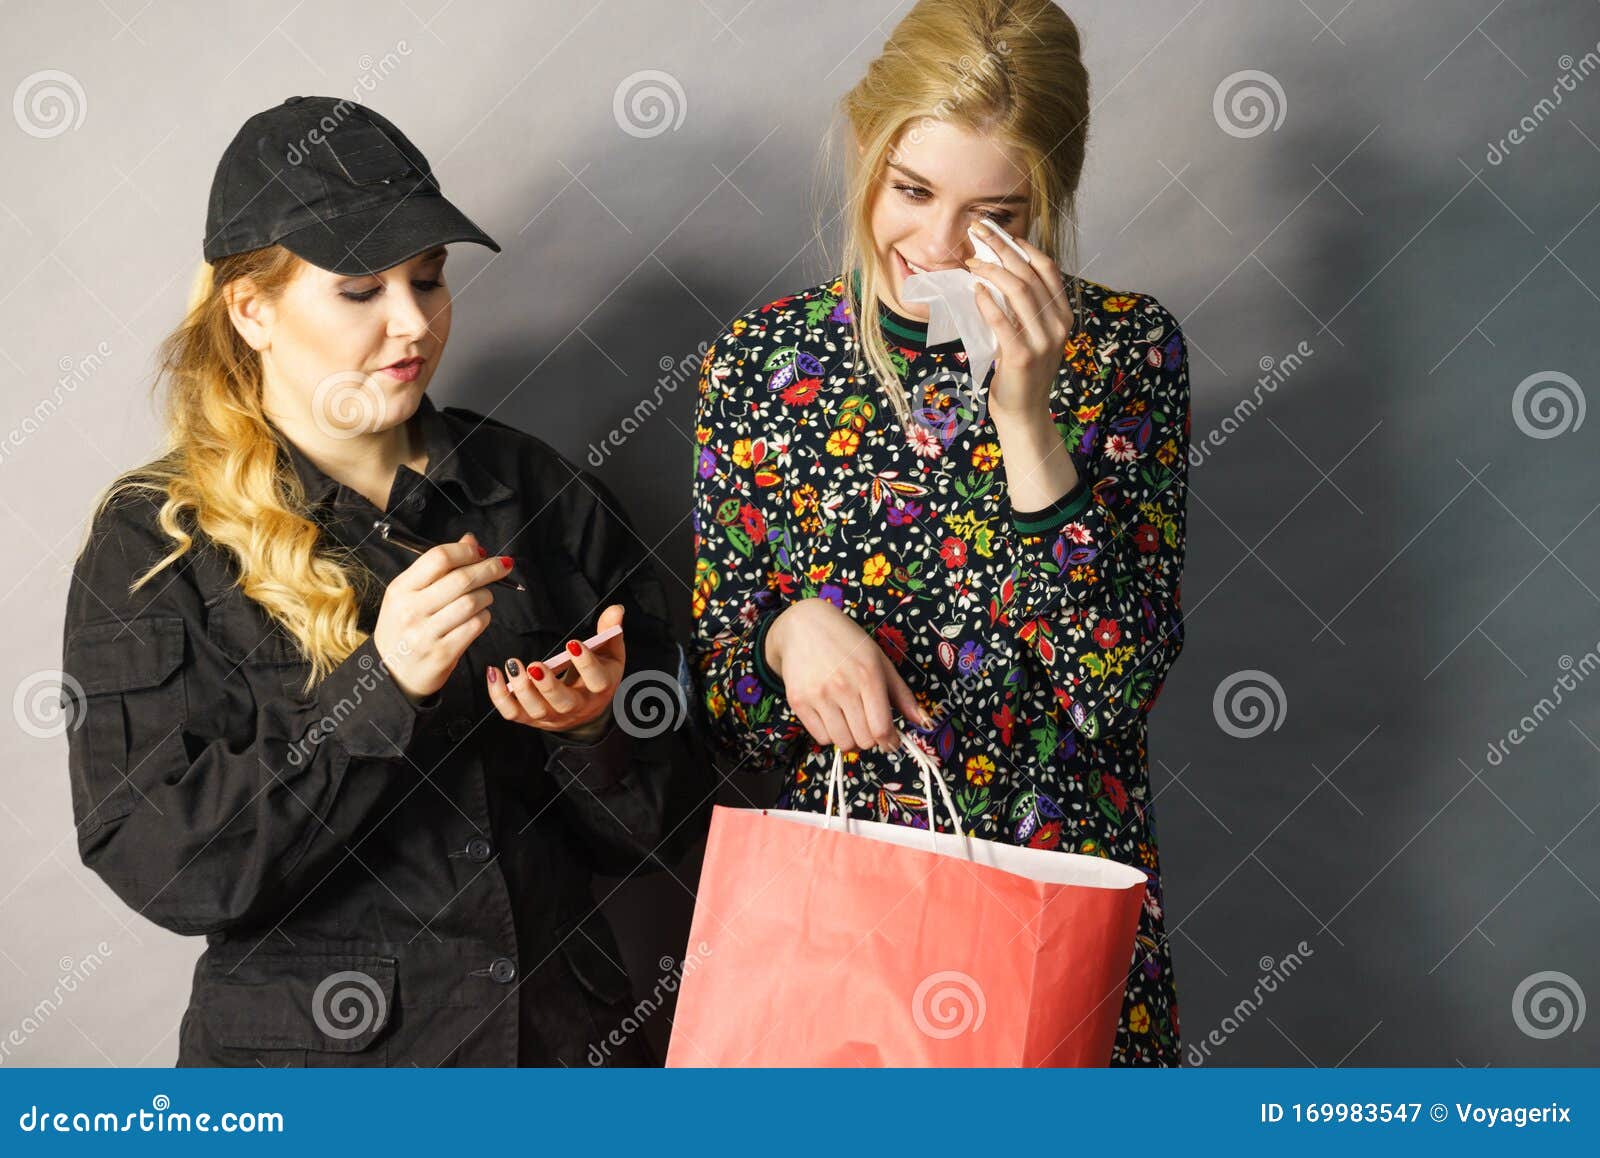 Security Guard And Shoplifter Stock Image Image Of Catch Clothes